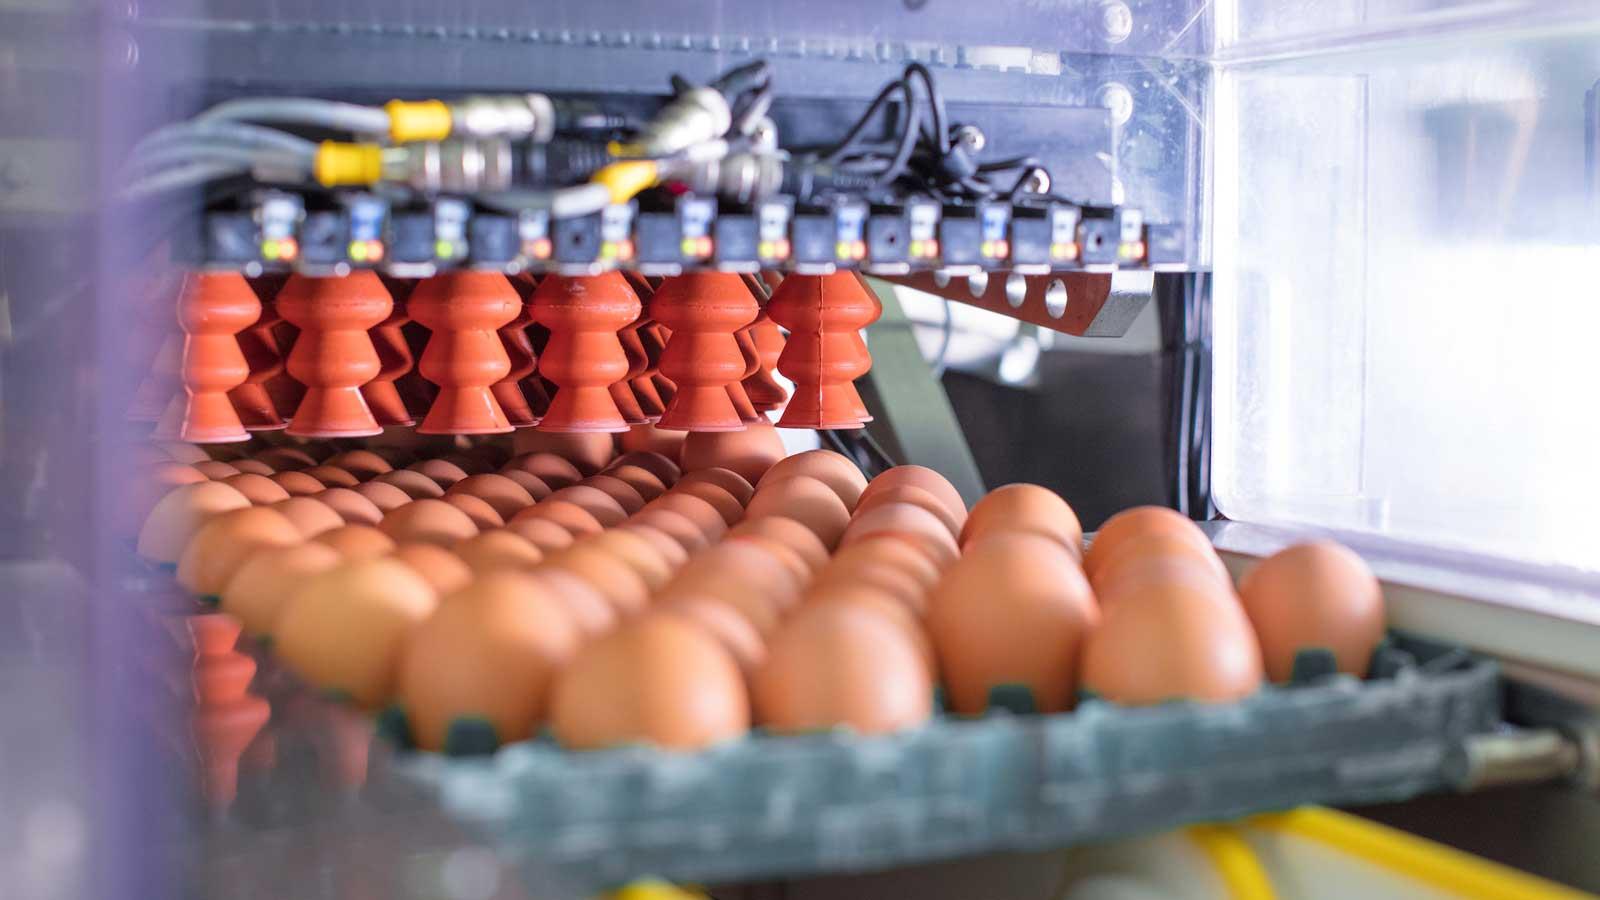 Eggs in production